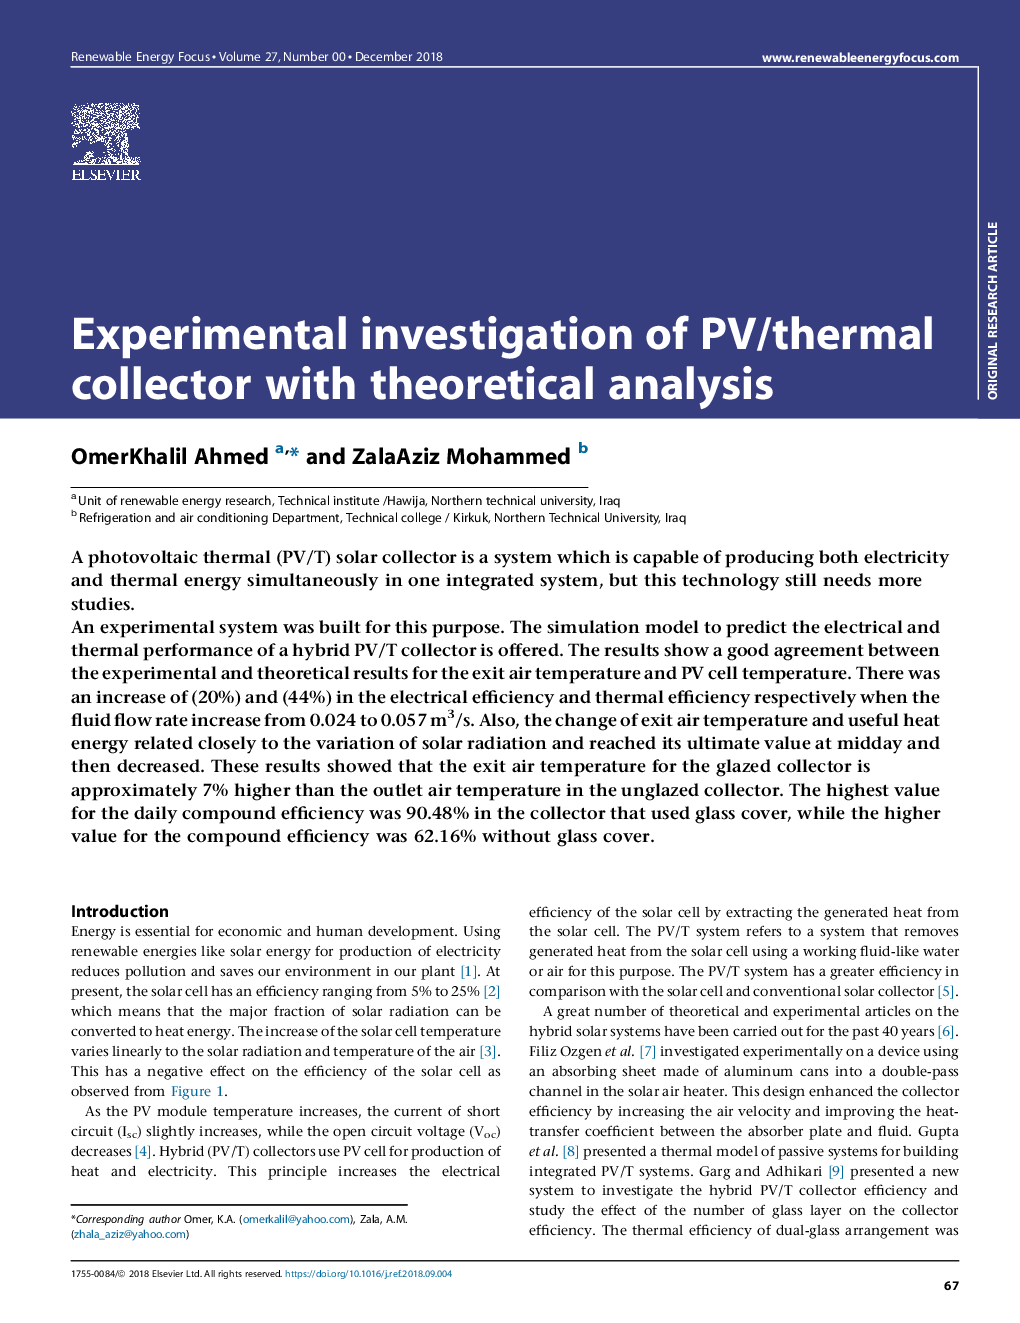 Experimental investigation of PV/thermal collector with theoretical analysis